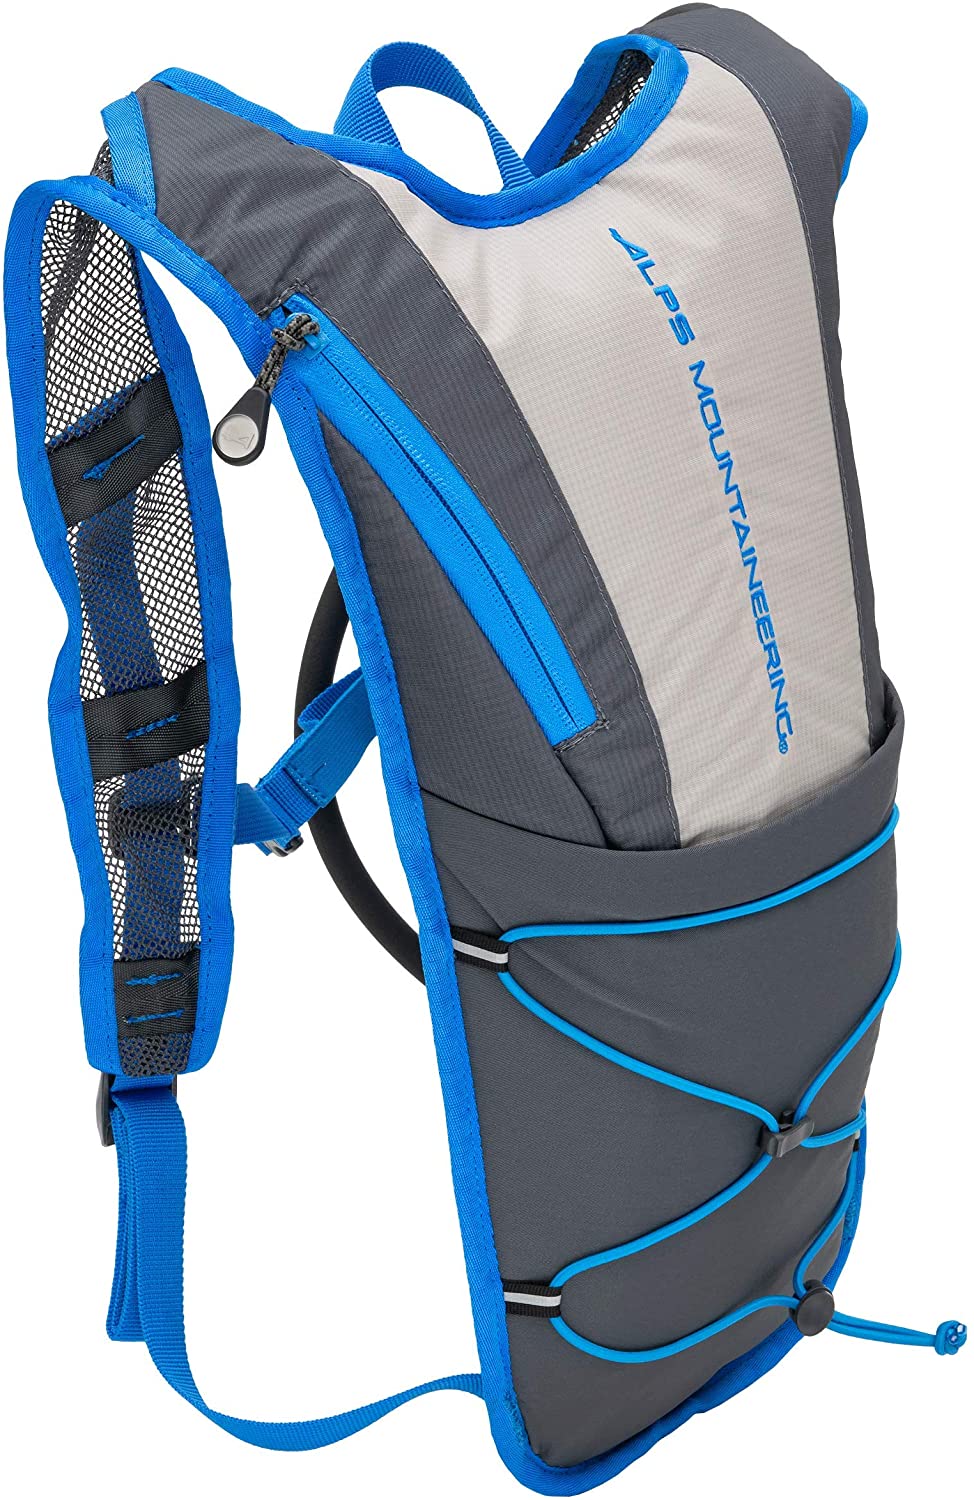 ALPS Mountaineering Hydro Trail Day Backpack 3L, Gray/Blue- AL6010033